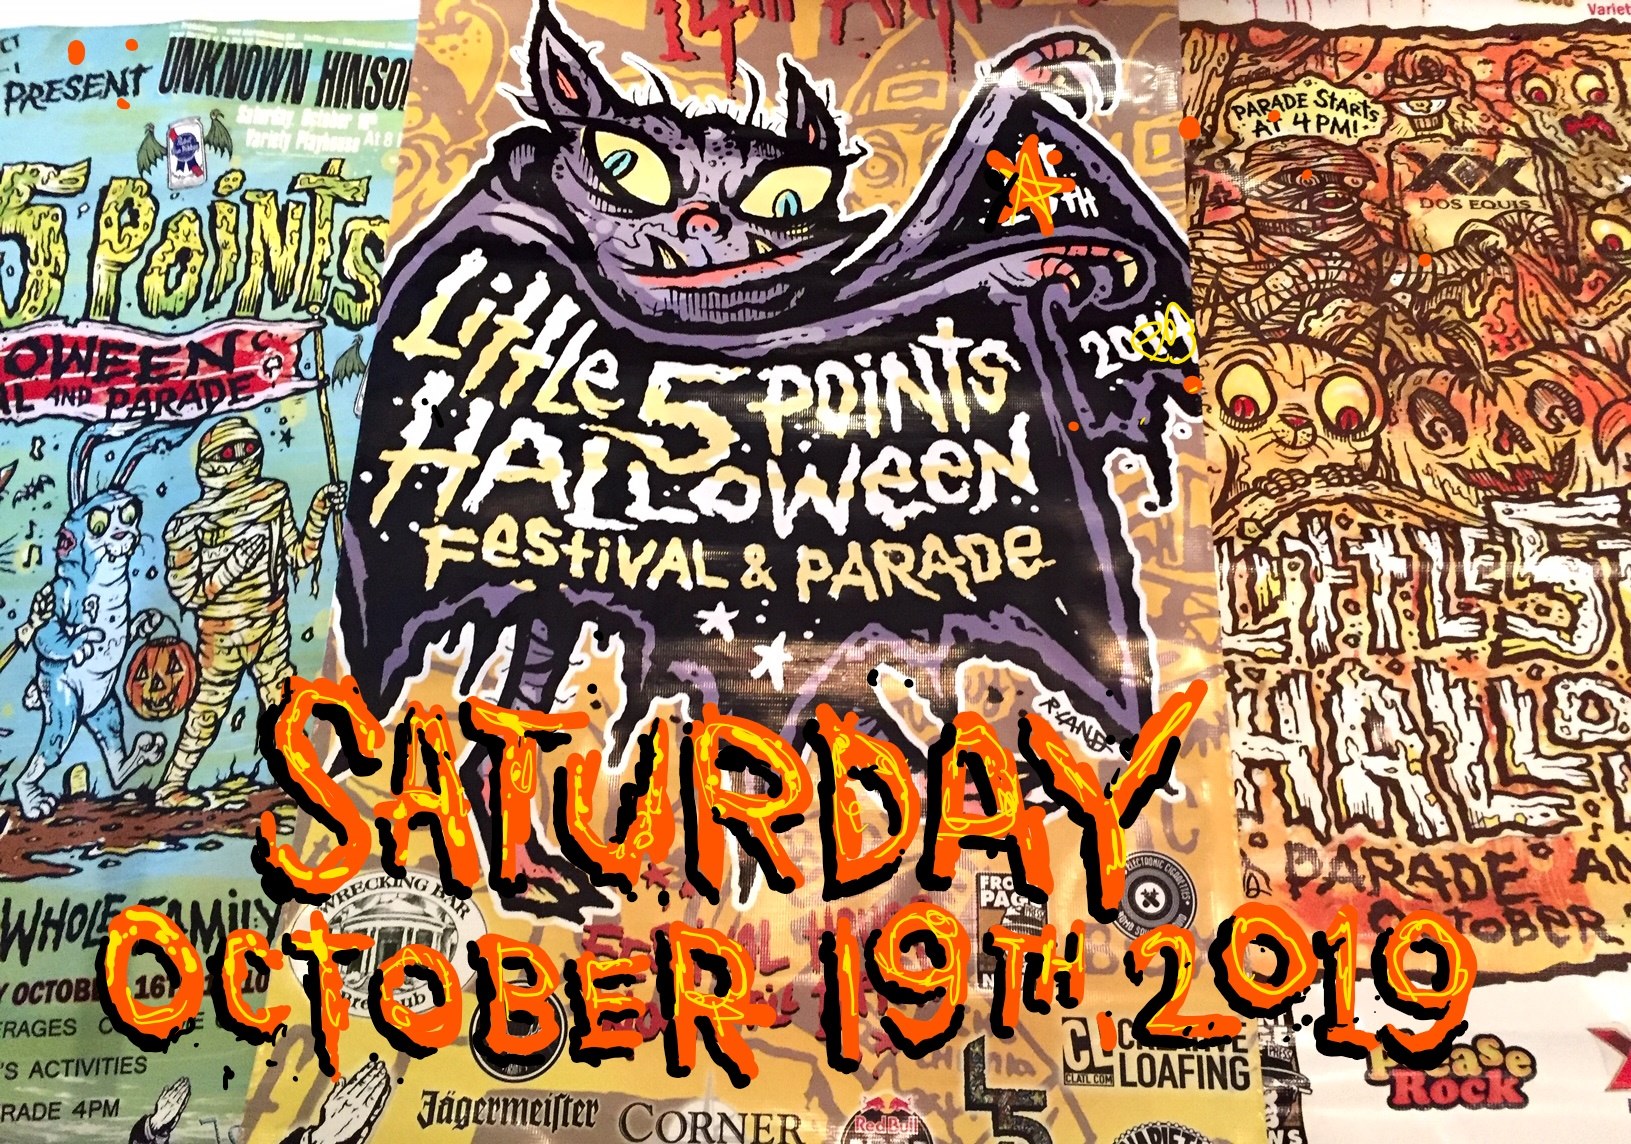 little 5 points halloween parade 2020 Little 5 Points Halloween Festival And Parade 2019 Creative Loafing little 5 points halloween parade 2020